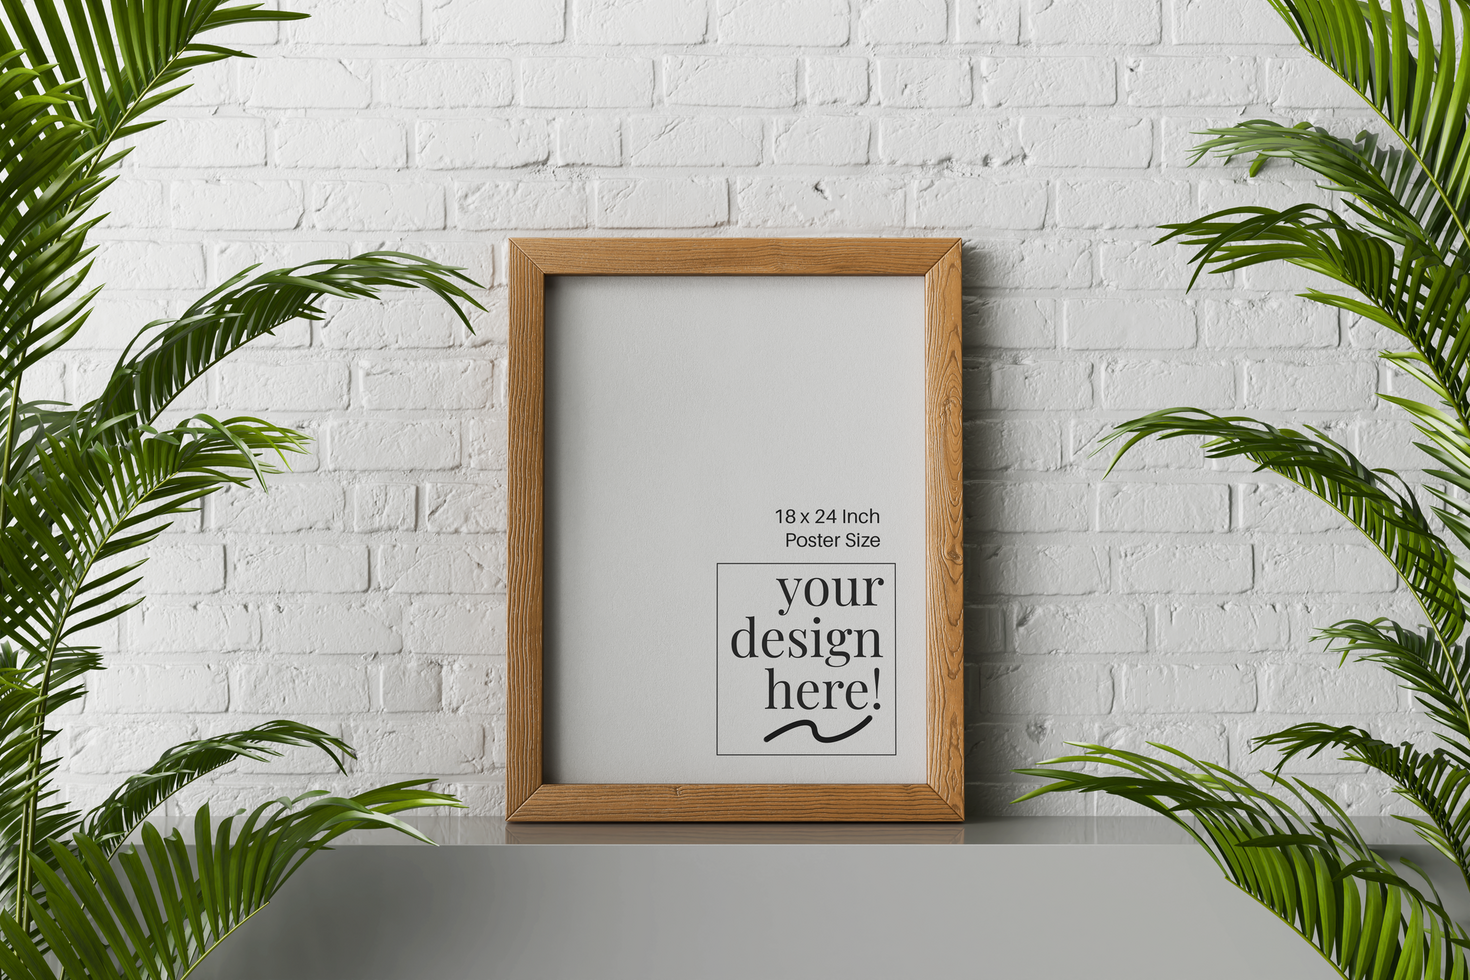 18x24 inch wooden frame vertical canvas paper medium poster mockup sitting on table with brick wall modern contemporary interior psd